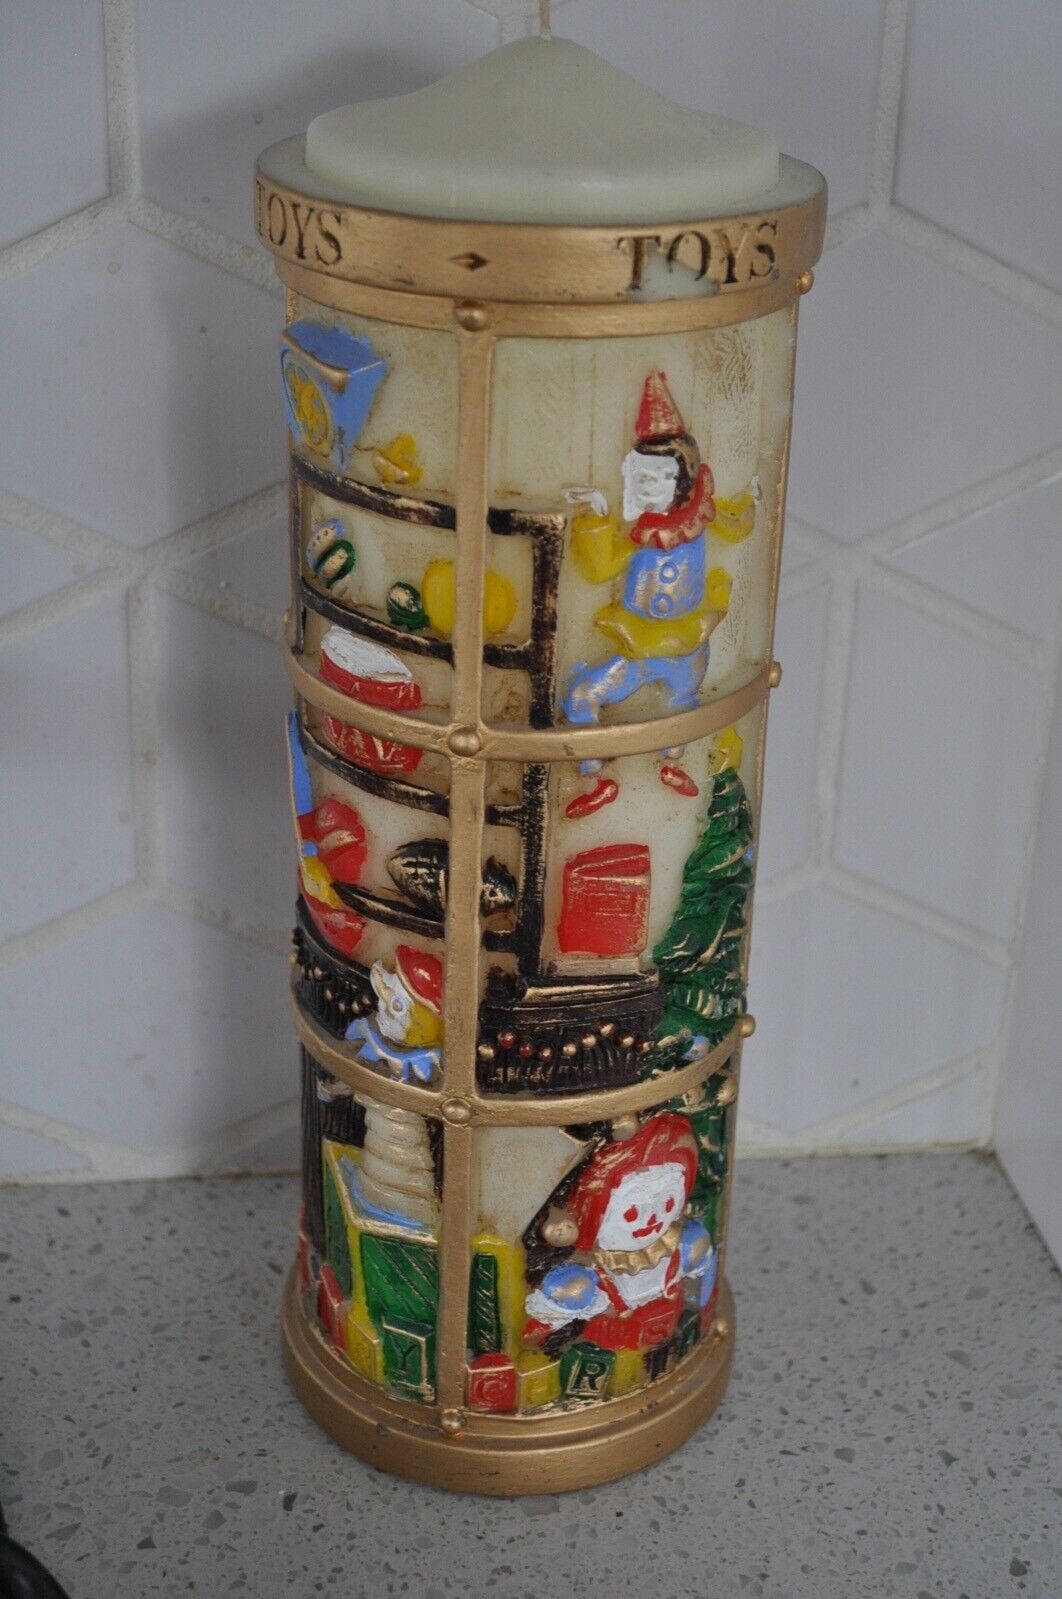 Vintage Christmas Toys Candle XL Pillar from Carolina Made in Japan